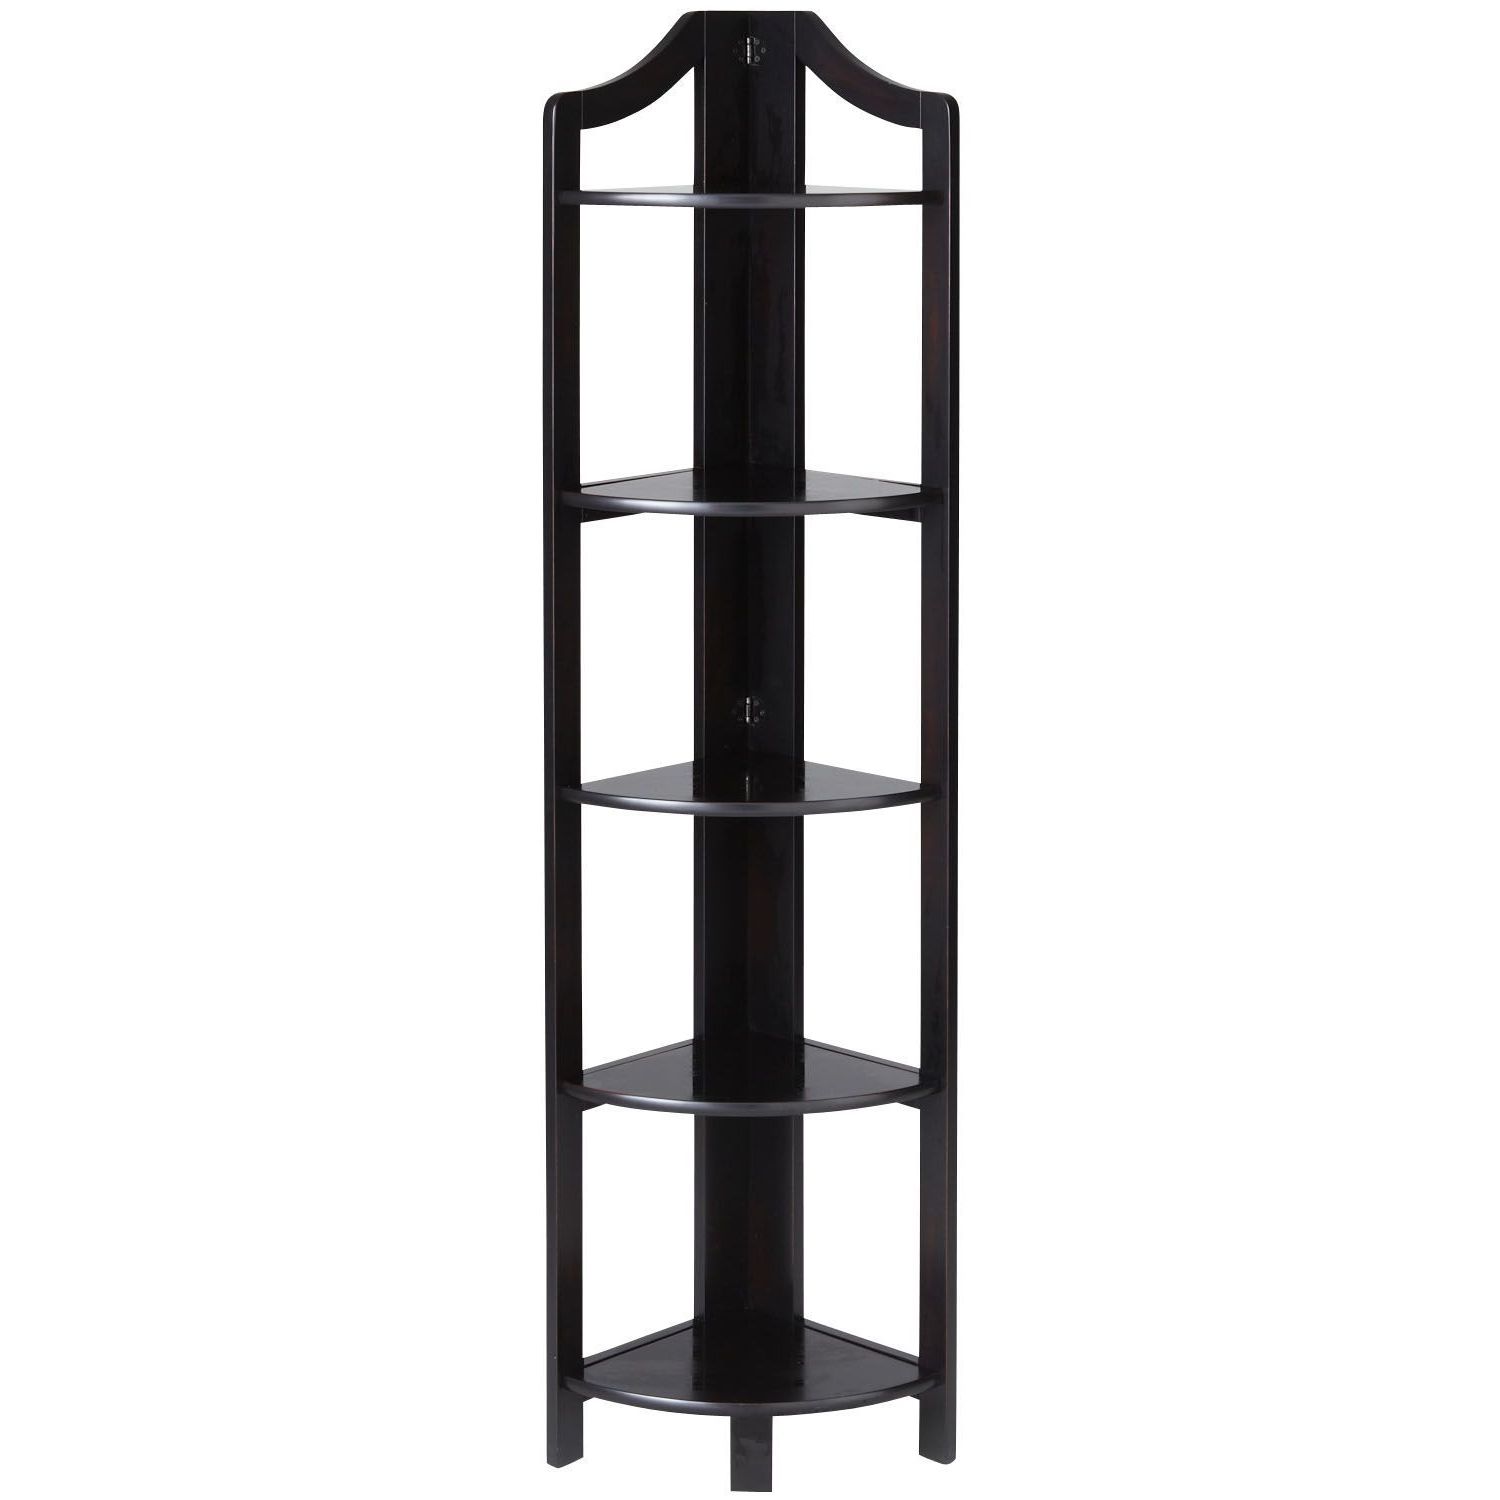 Clifton Rubbed Black Tall Corner Shelf (View 6 of 20)